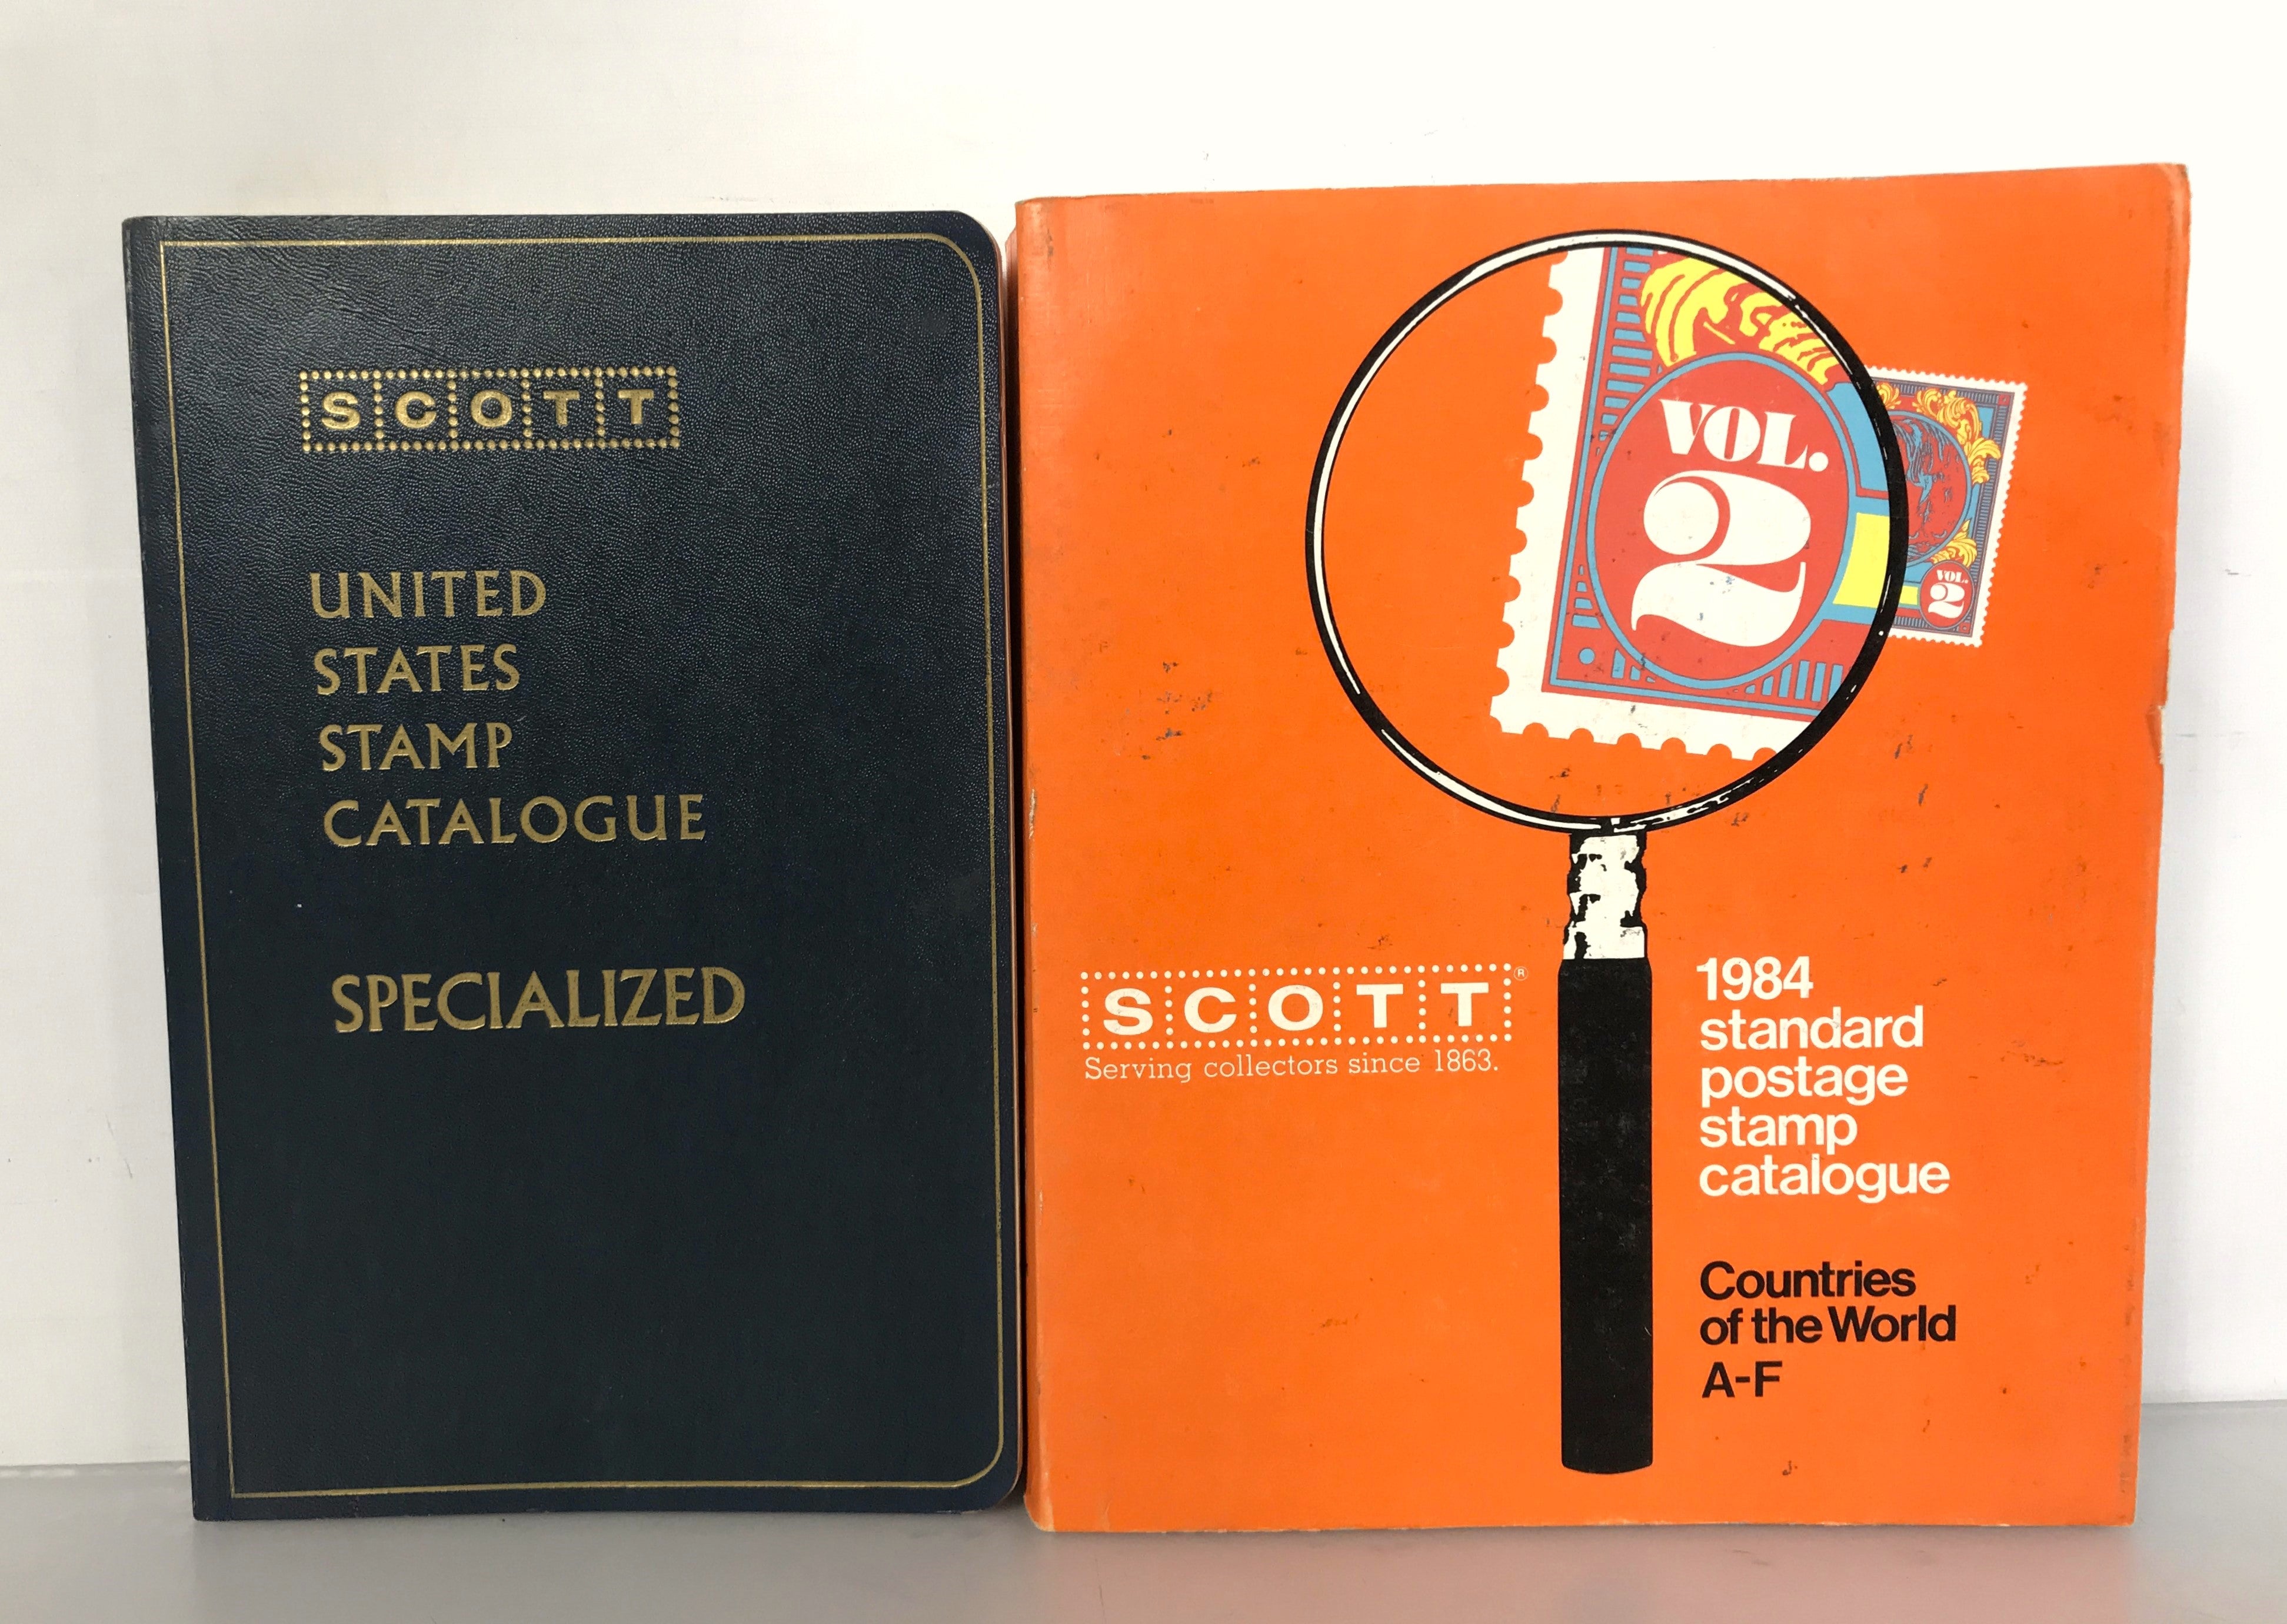 Lot of 2 Scott Stamp Catalogues: United States Specialized (1974) and 1984 Vol 2 Countries of the World A-F SC